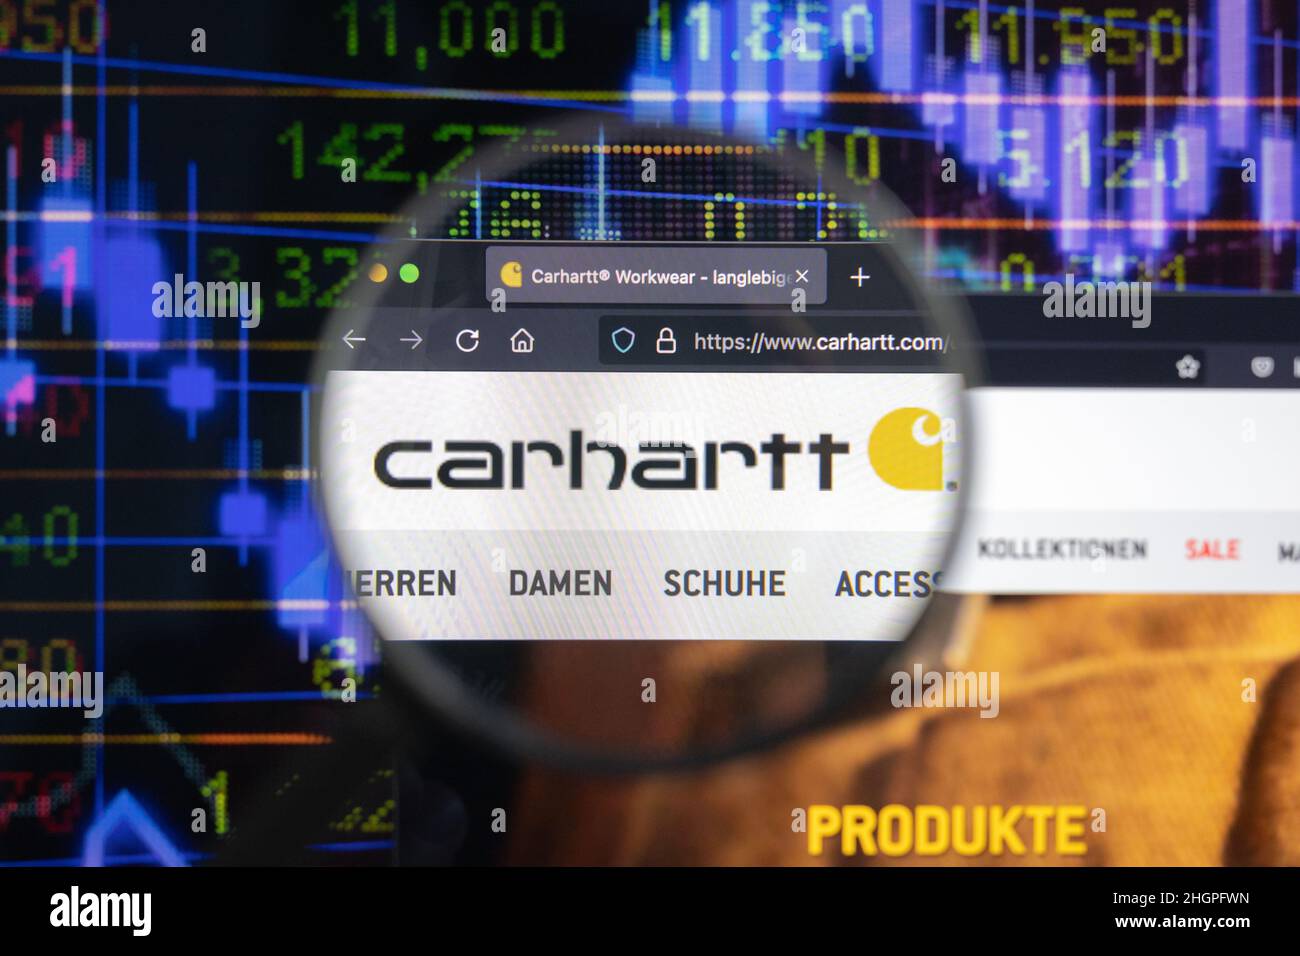 Carhartt company logo on a website with blurry stock market developments in the background, seen on a computer screen through a magnifying glass. Stock Photo